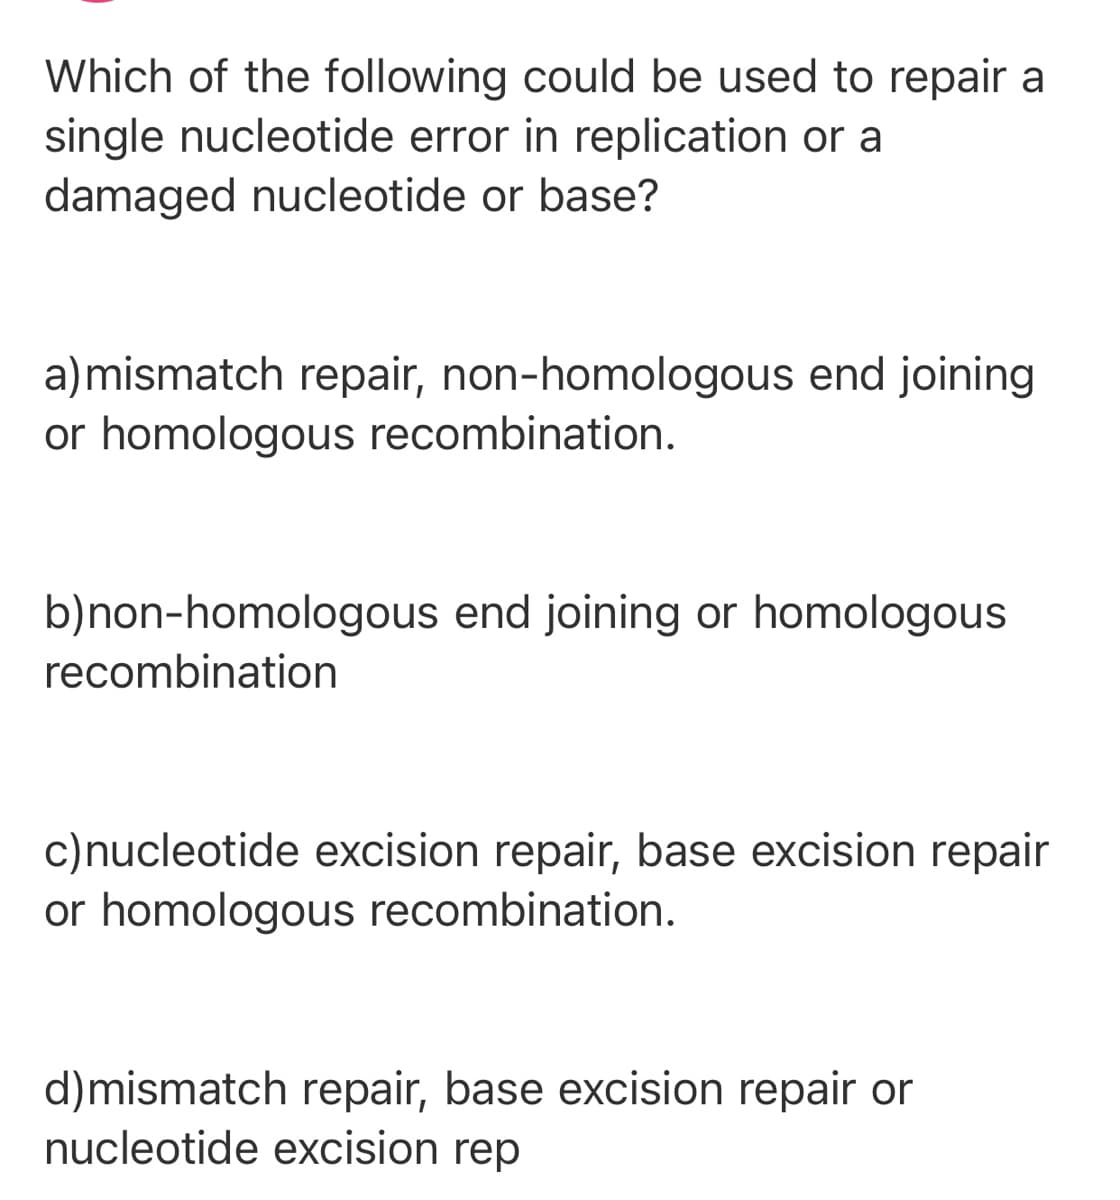 Which of the following could be used to repair a
single nucleotide error in replication or a
damaged nucleotide or base?
a)mismatch repair, non-homologous end joining
or homologous recombination.
b)non-homologous end joining or homologous
recombination
c)nucleotide excision repair, base excision repair
or homologous recombination.
d)mismatch repair, base excision repair or
nucleotide excision rep
